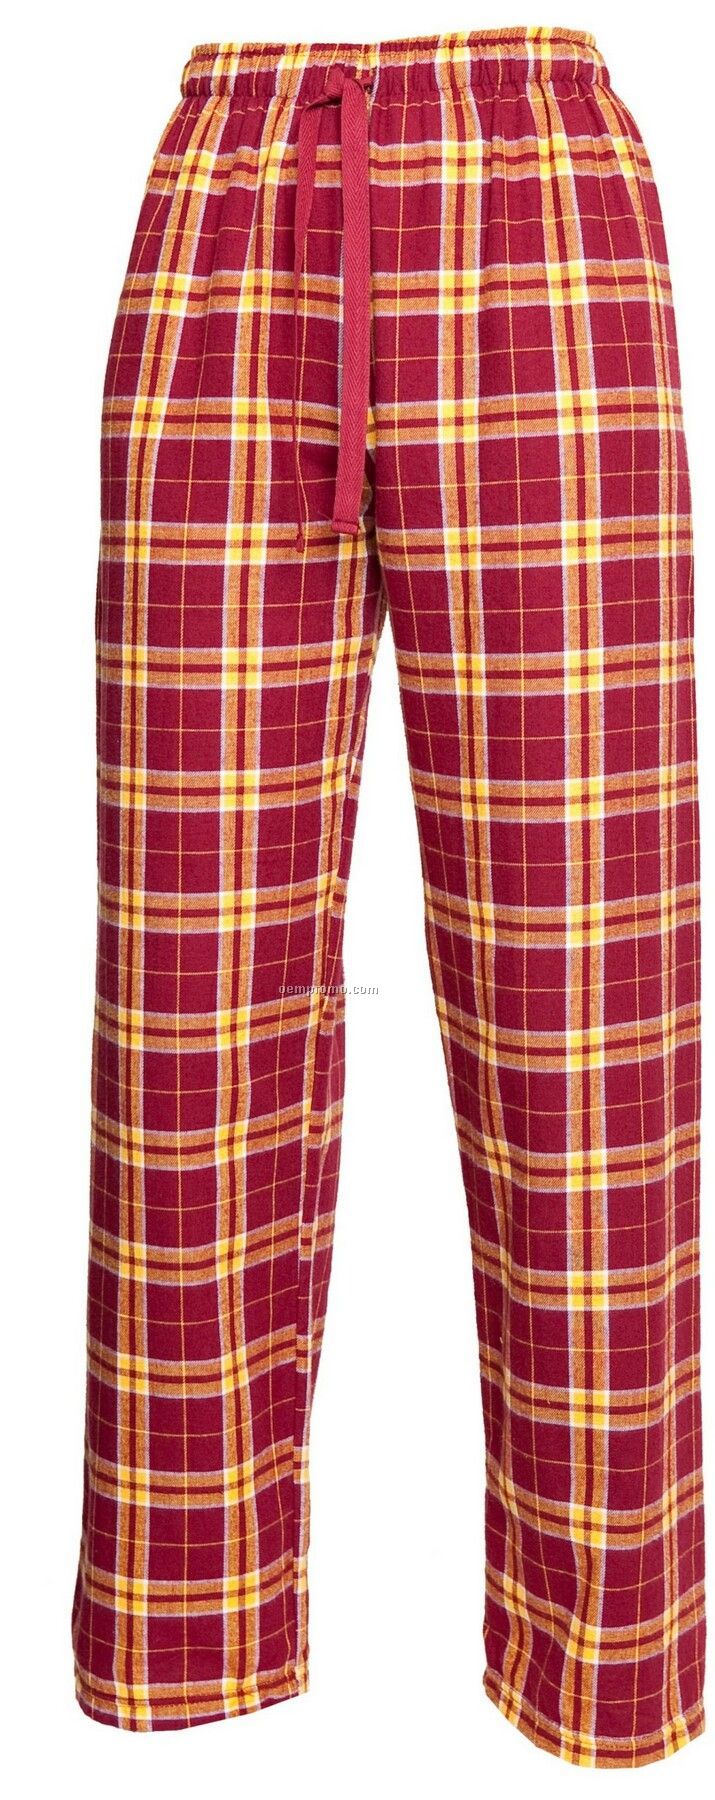 Adult Team Pride Flannel Pant In Maroon Red & Gold Plaid